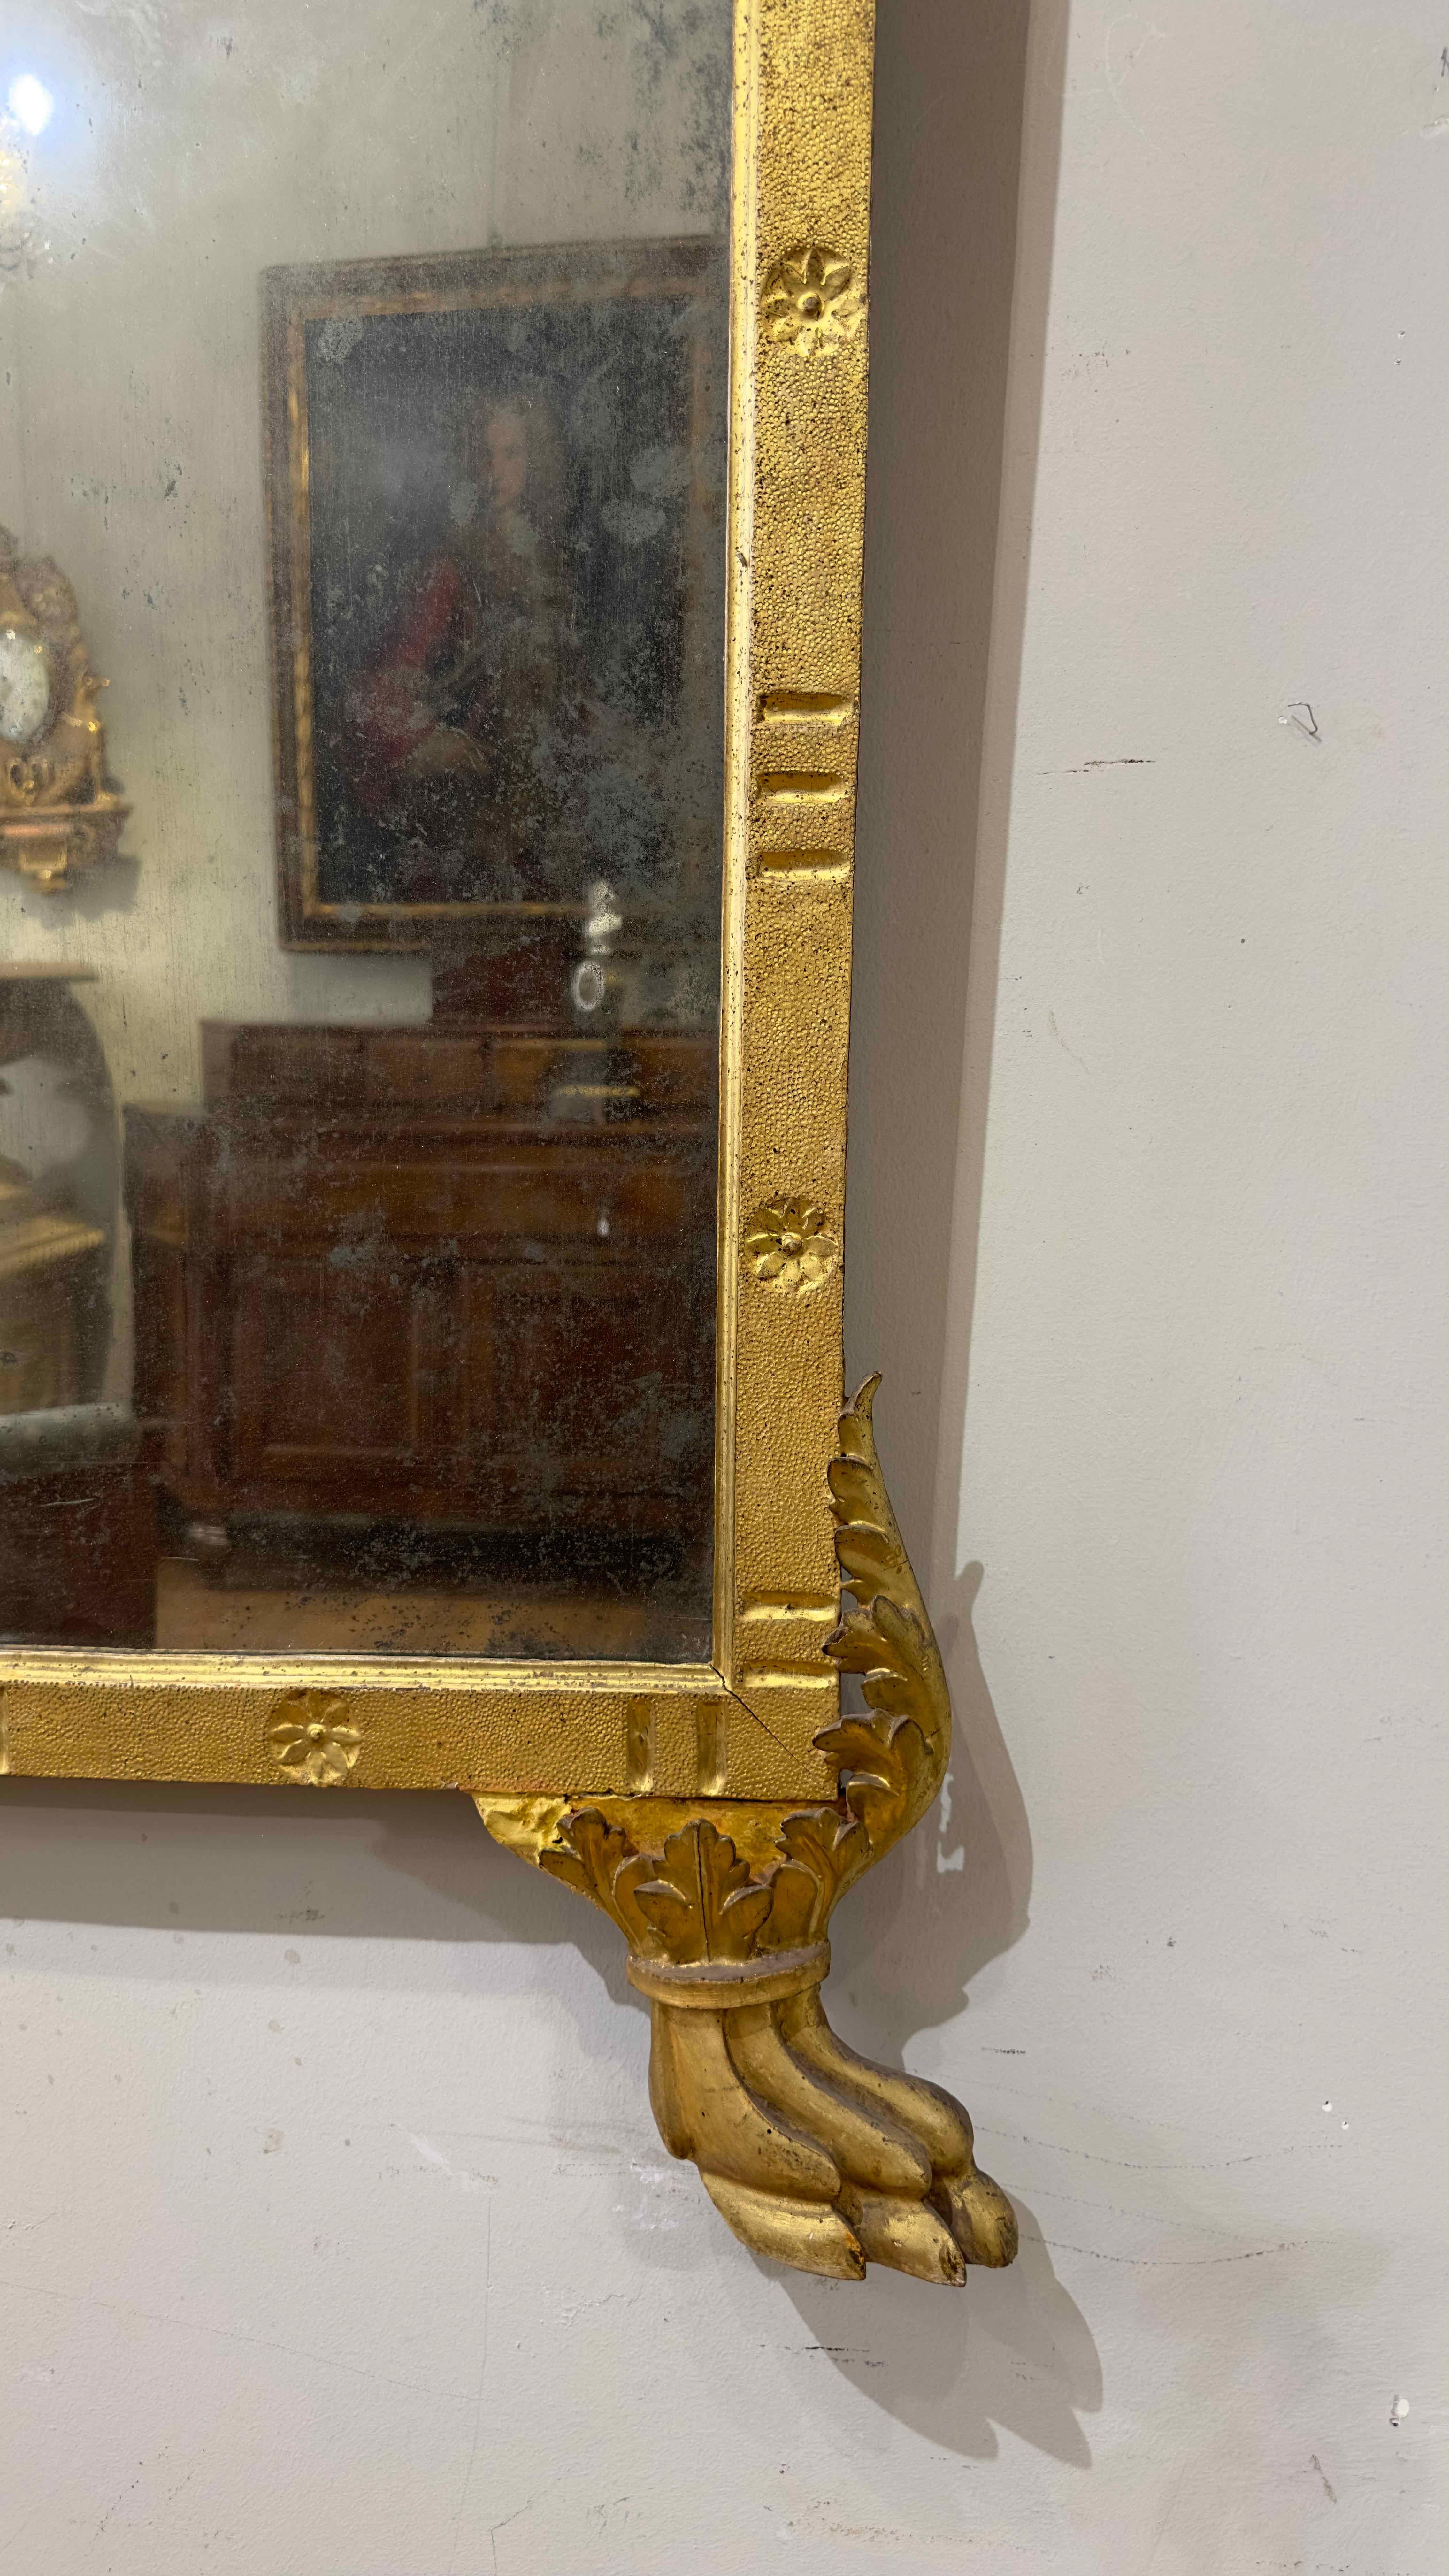 END OF THE 18th CENTURY NEOCLASSICAL MIRROR WITH CORNUCOPIAS AND OLIVE BRANCHES  For Sale 3